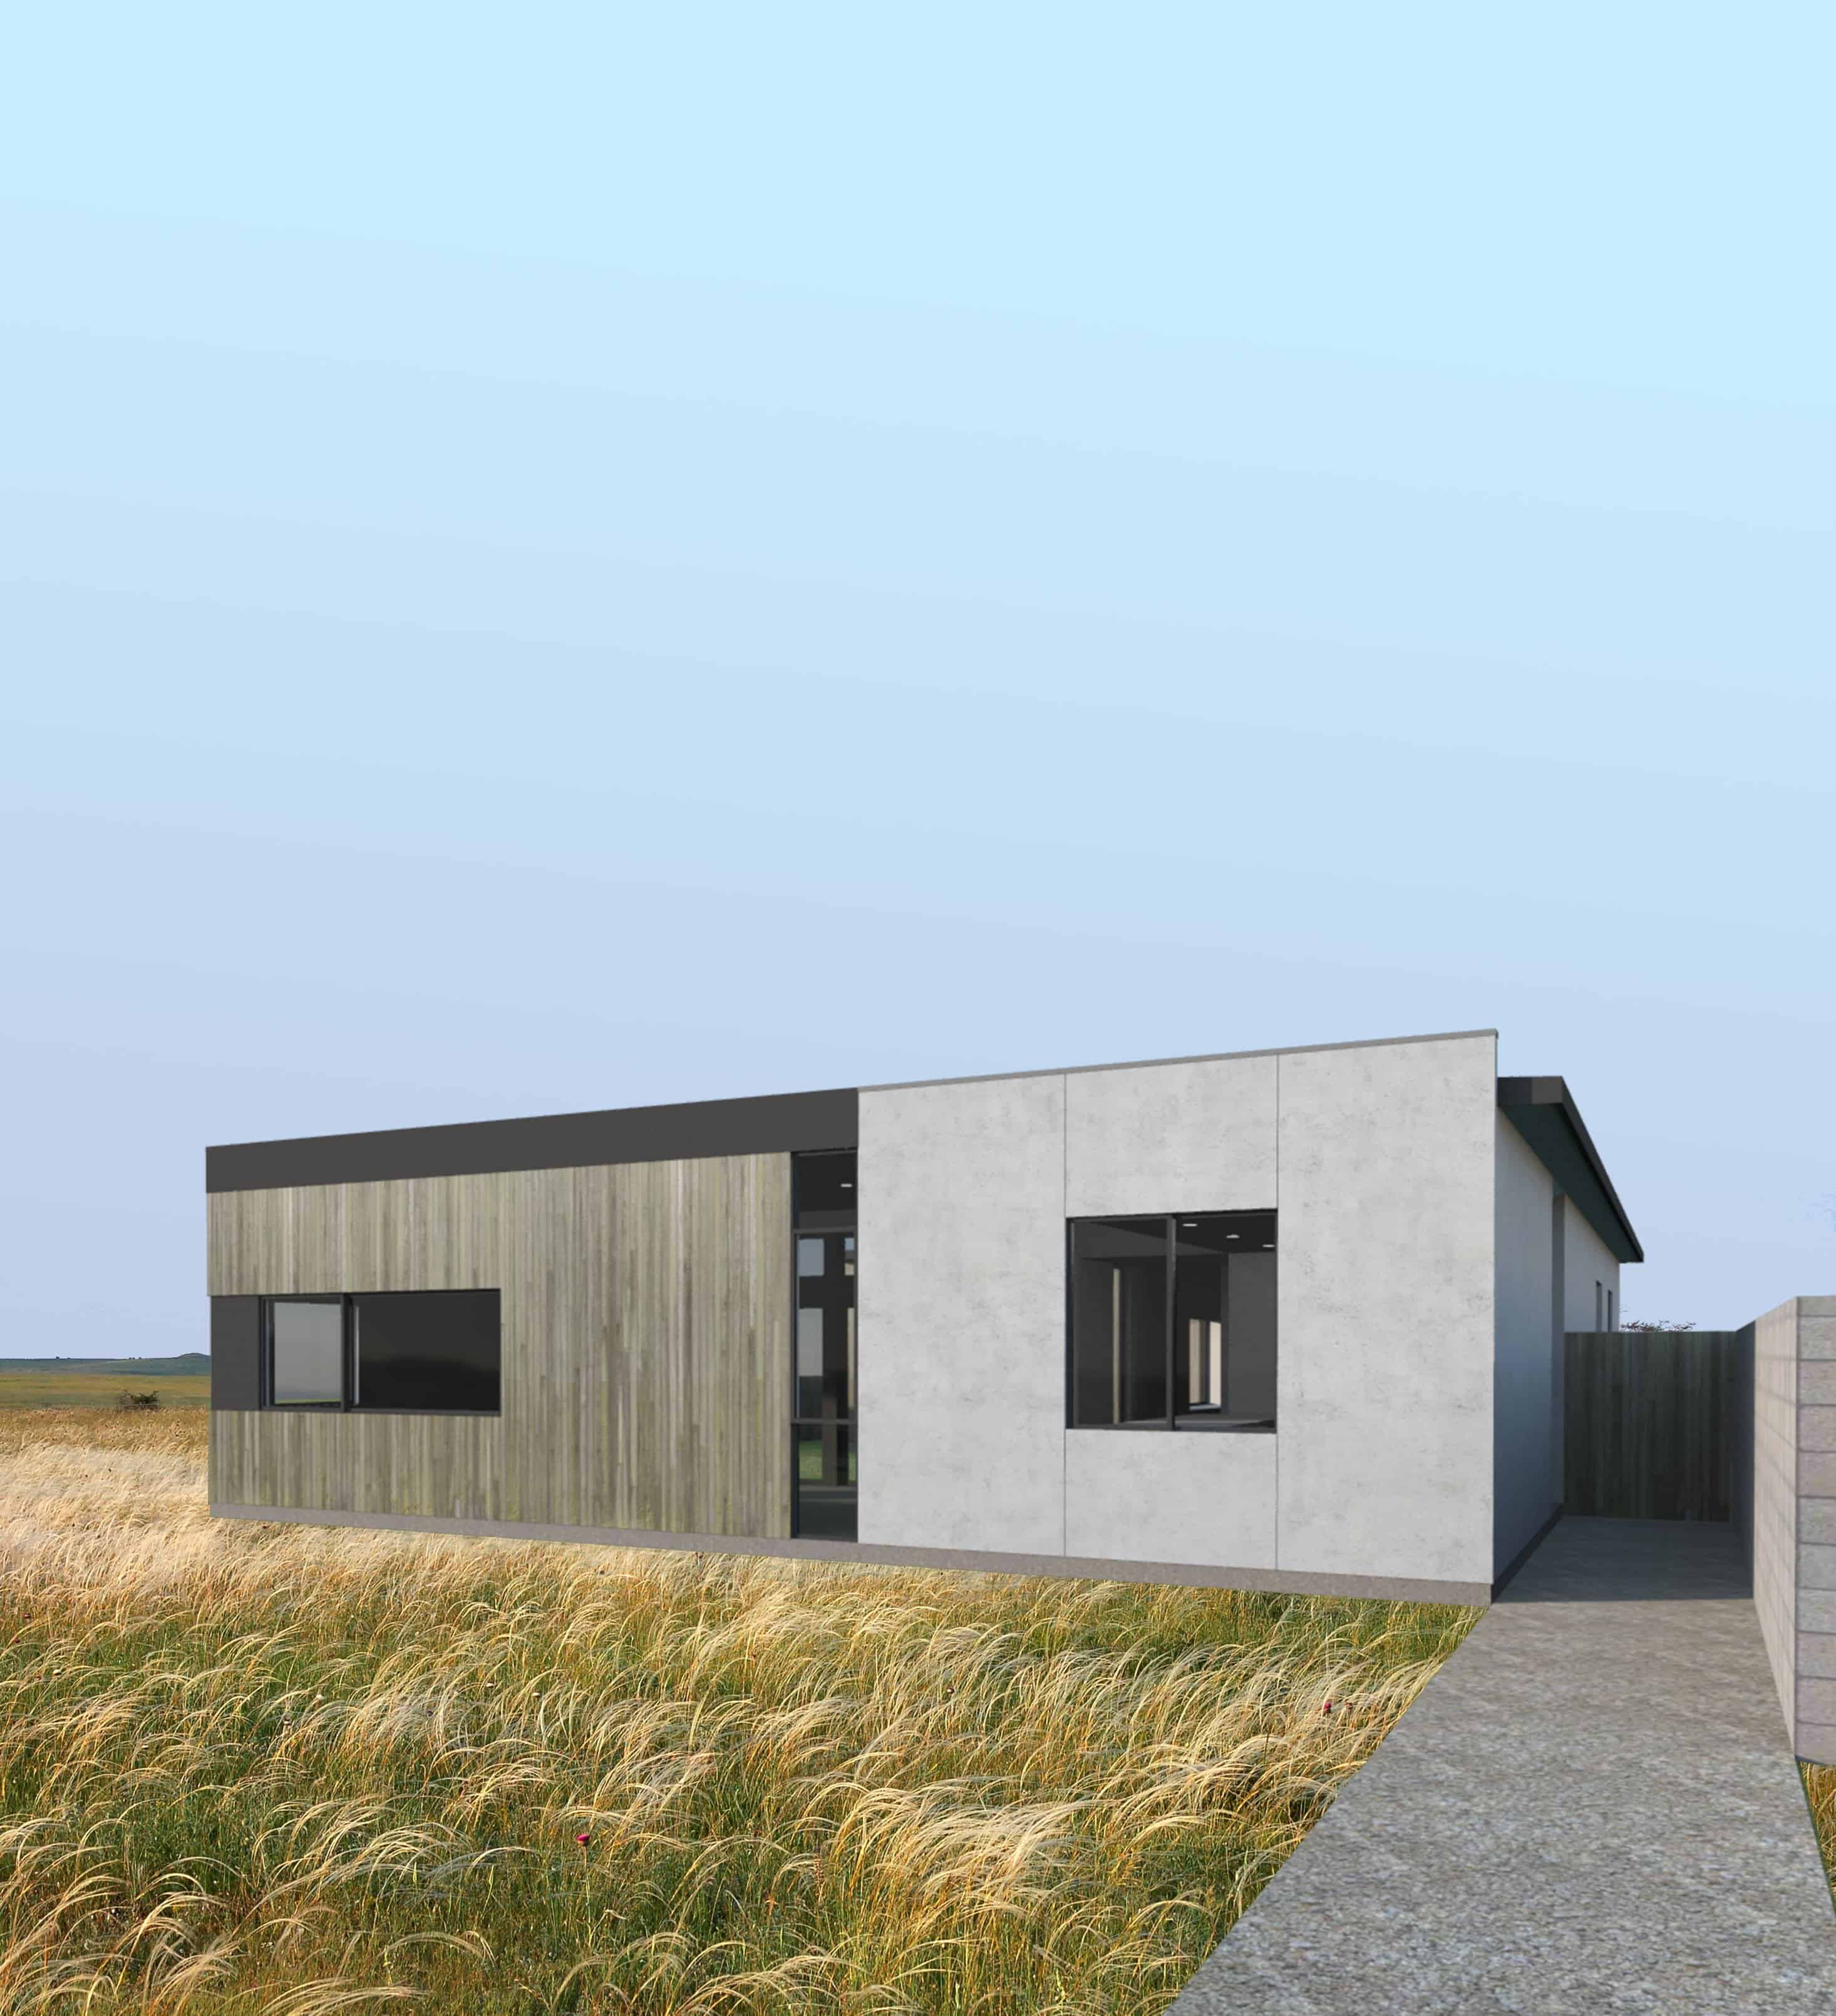 MA Modular C Plan model modern prefab home with rendering view of exterior side.